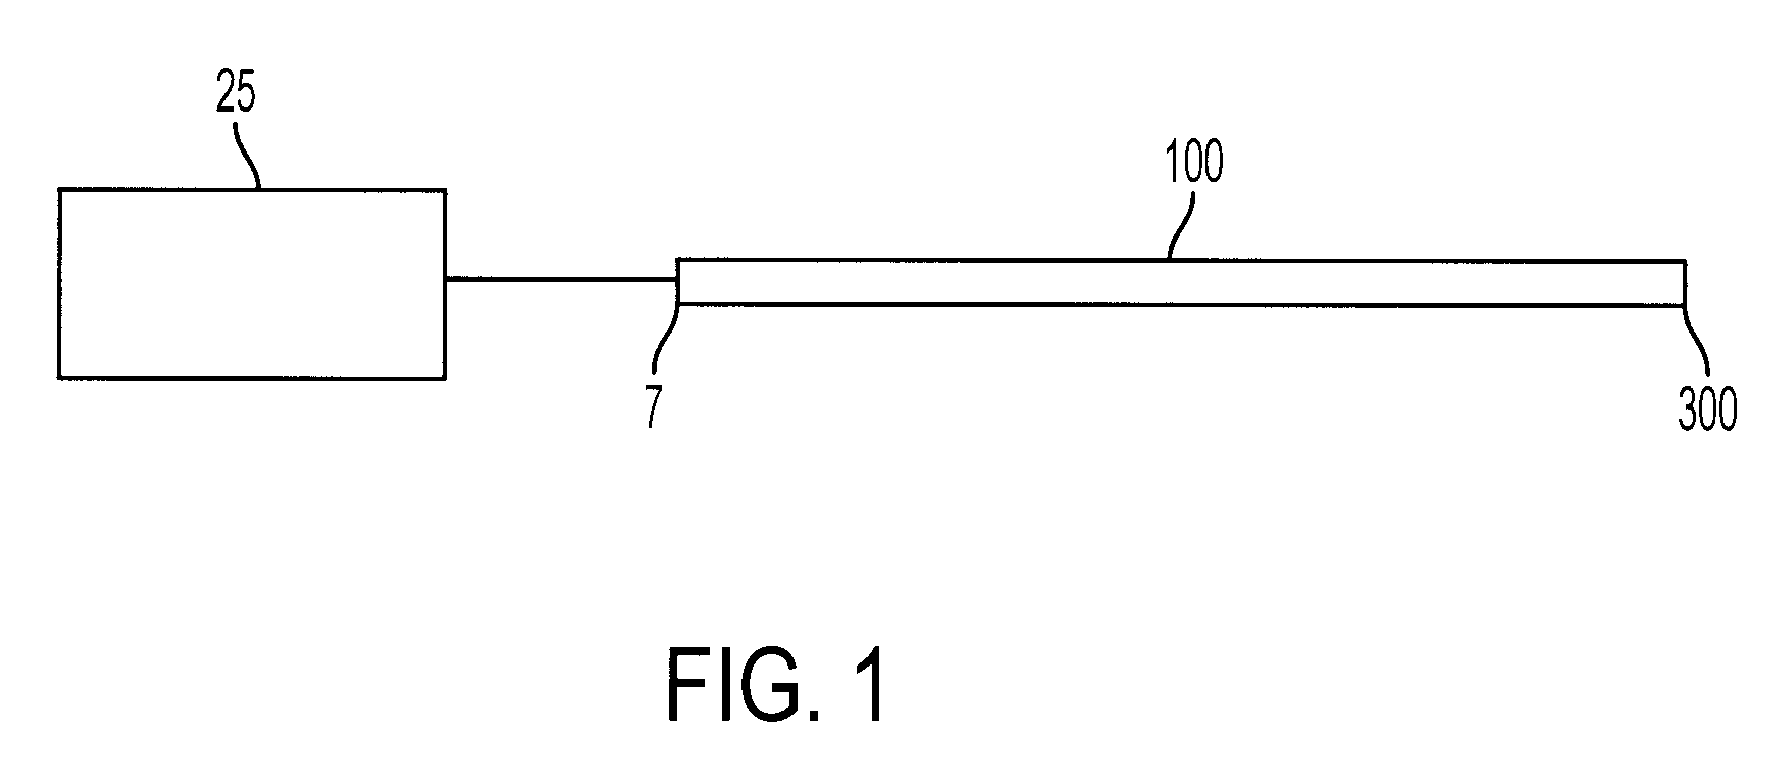 Access needle pressure sensor device and method of use